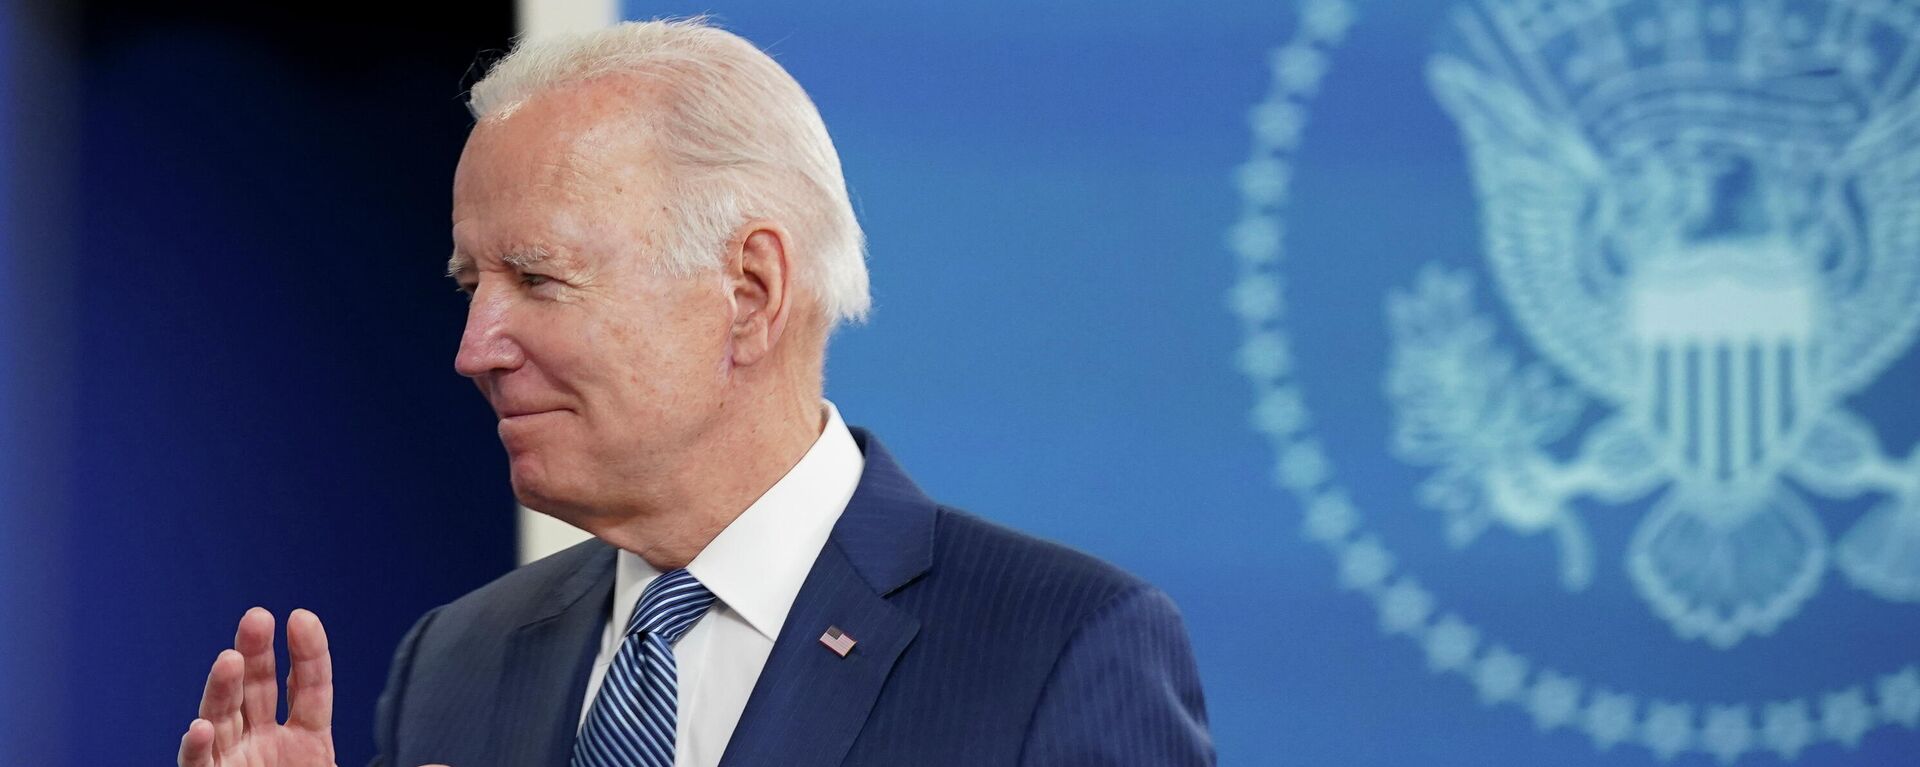 U.S. President Joe Biden departs after speaking about his administration's efforts to ease supply chain issues during the holiday season, at the White House in Washington, U.S., December 1, 2021 - Sputnik International, 1920, 12.12.2021